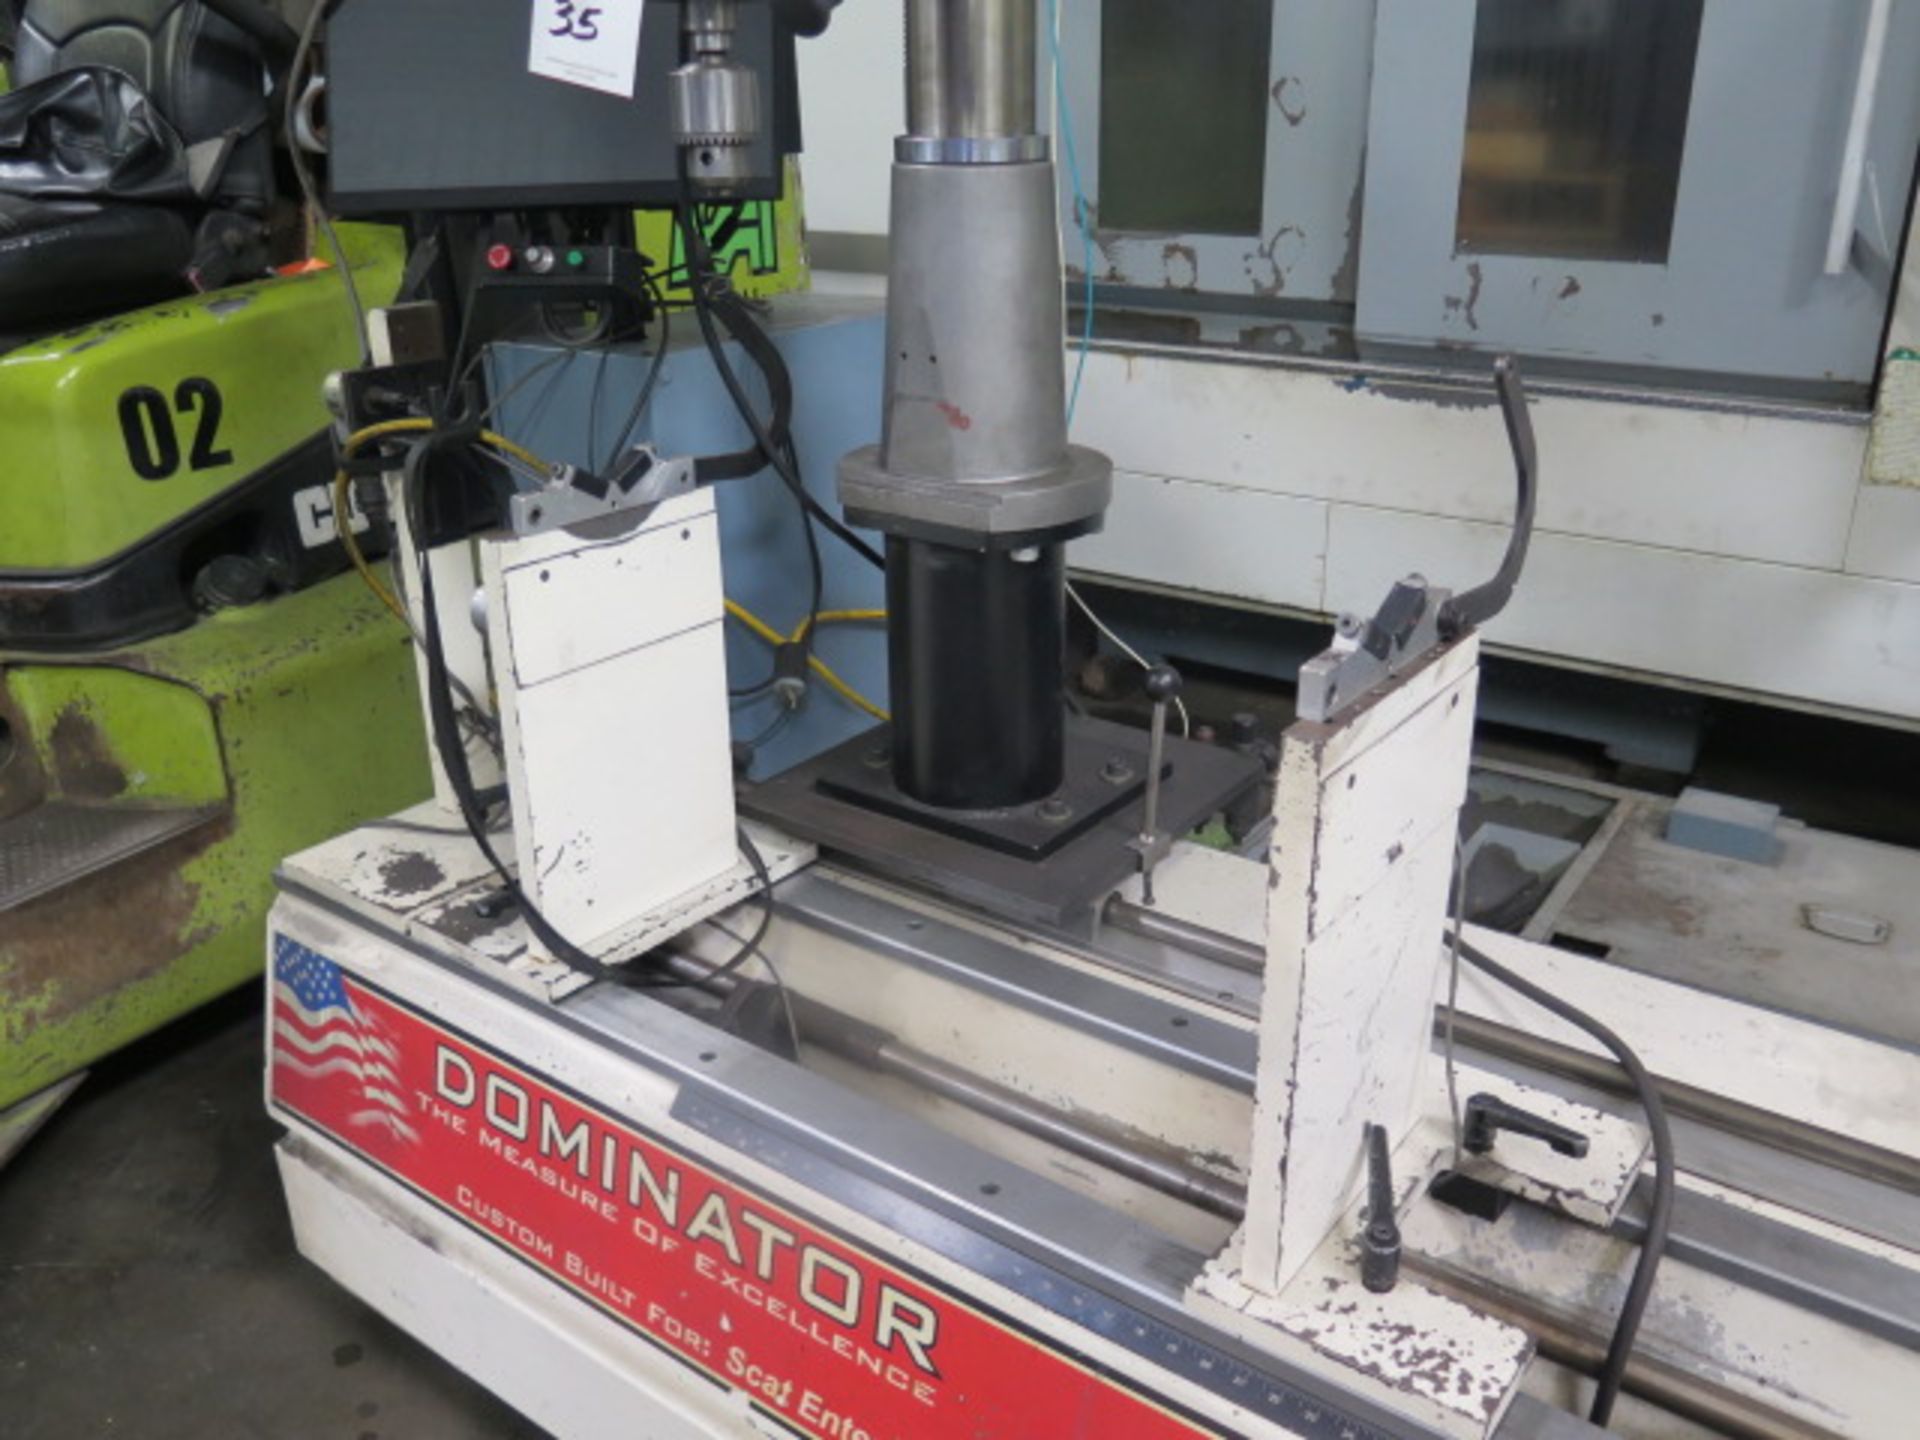 Hines "Dominator" Crank Shaft Balance Drilling Machine w/ Jet Drilling Head SOLD AS-IS - Image 5 of 12